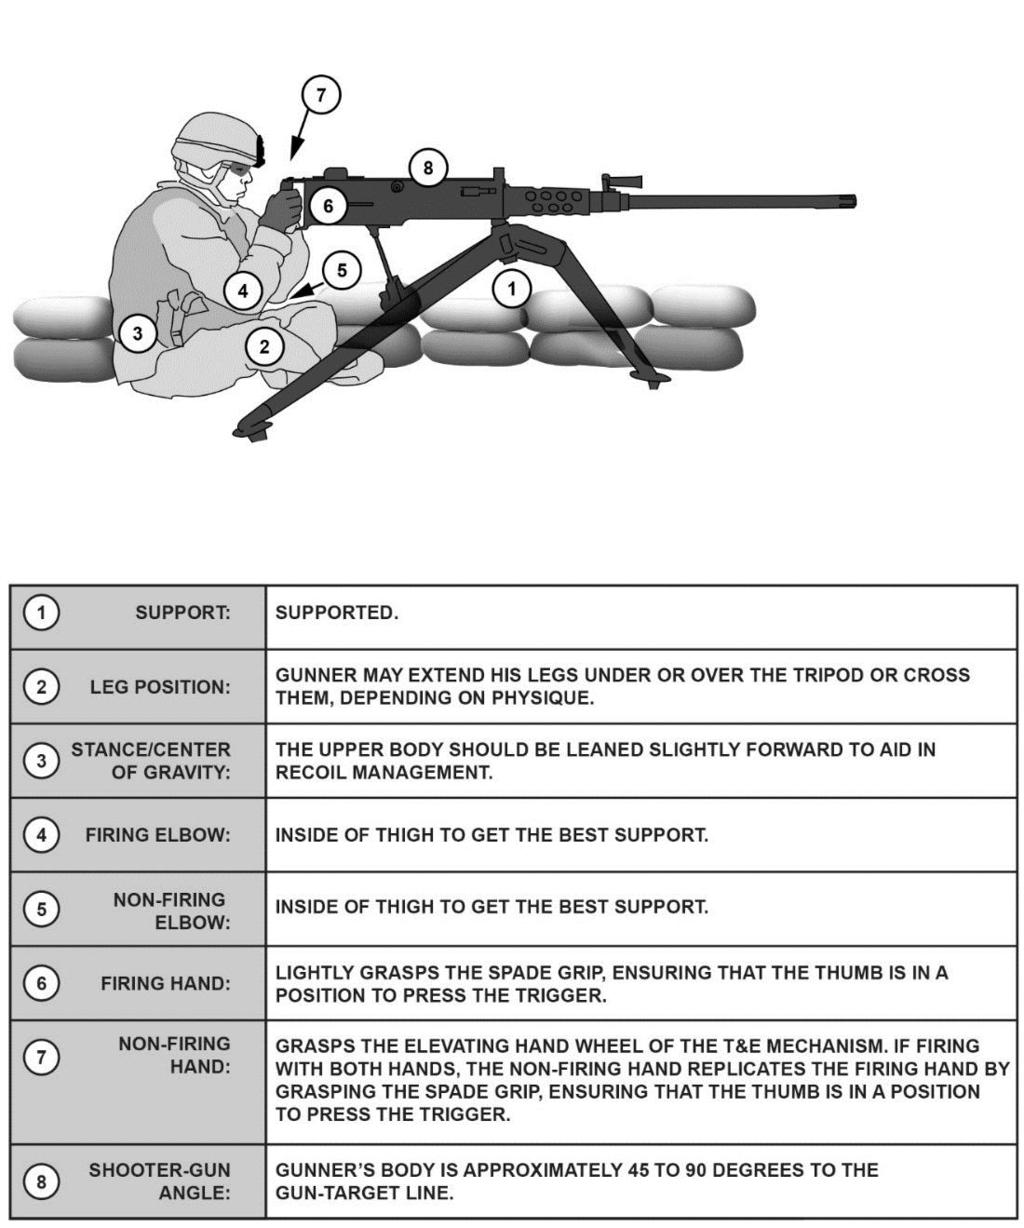 Chapter 6 provides a broad base of support and places most of the body weight behind the weapon (see figure 6-9).